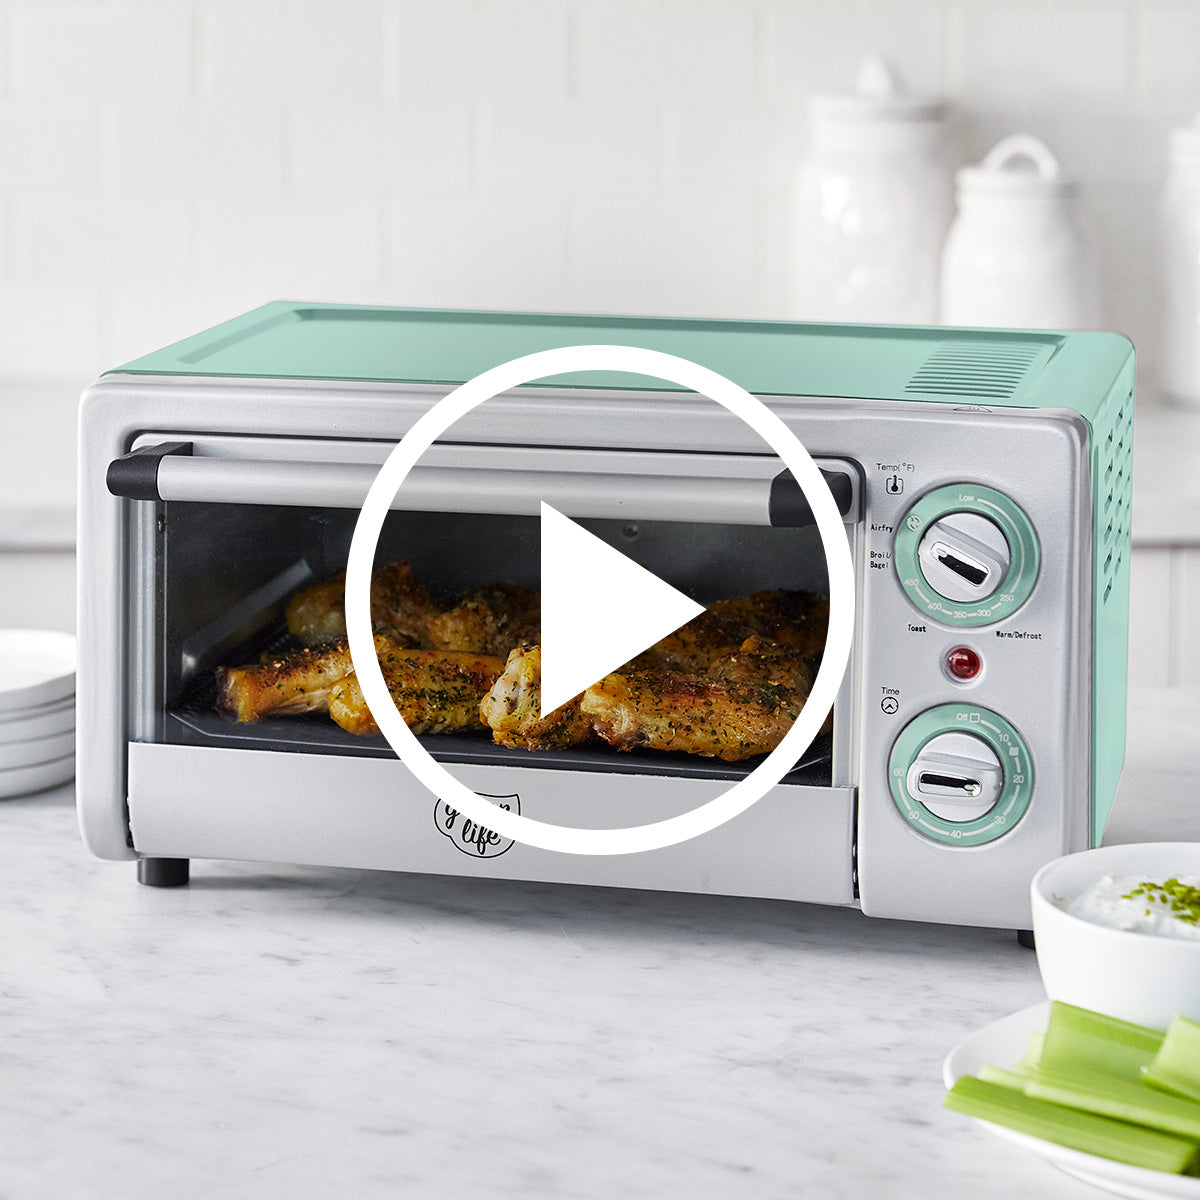 The Oster Extra-Large French Door Air Fry Countertop Toaster Oven is a  multi-fun